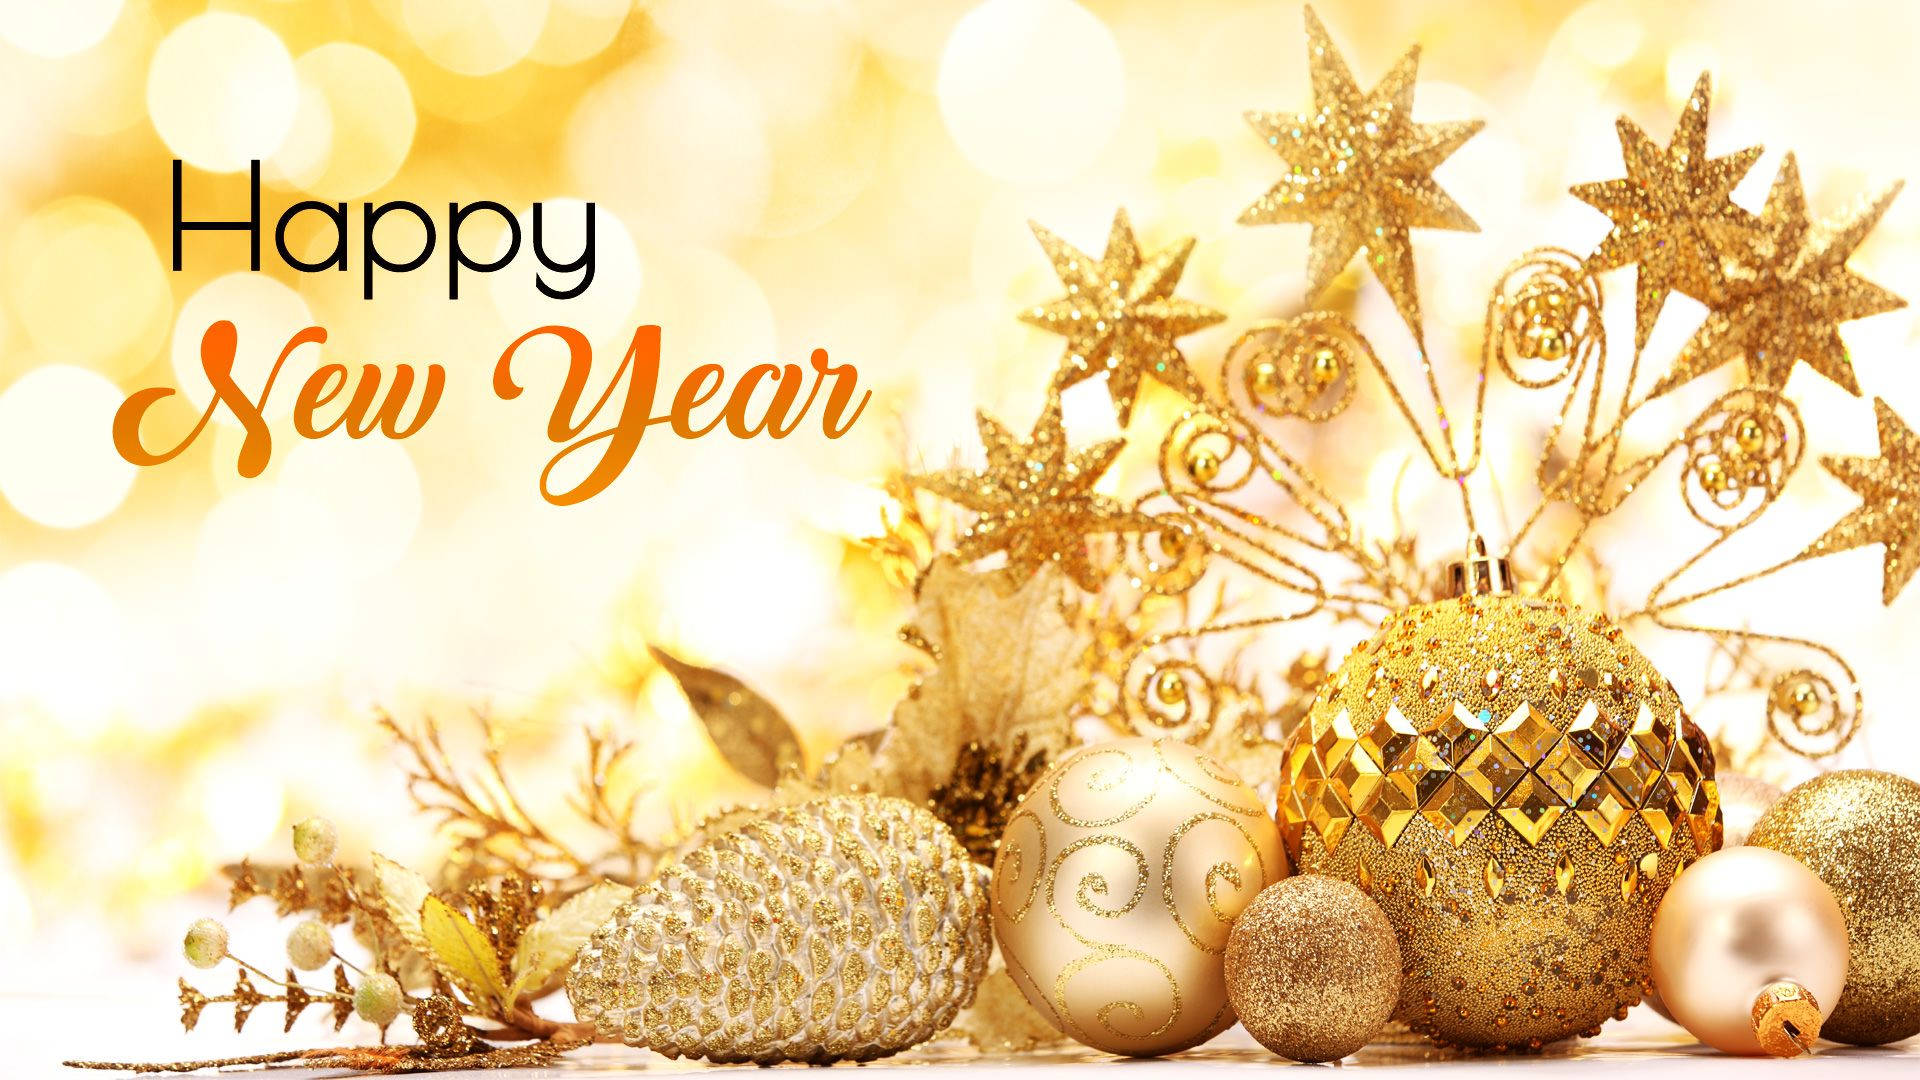 New Year Wallpapers: Free HD Download [500+ HQ]